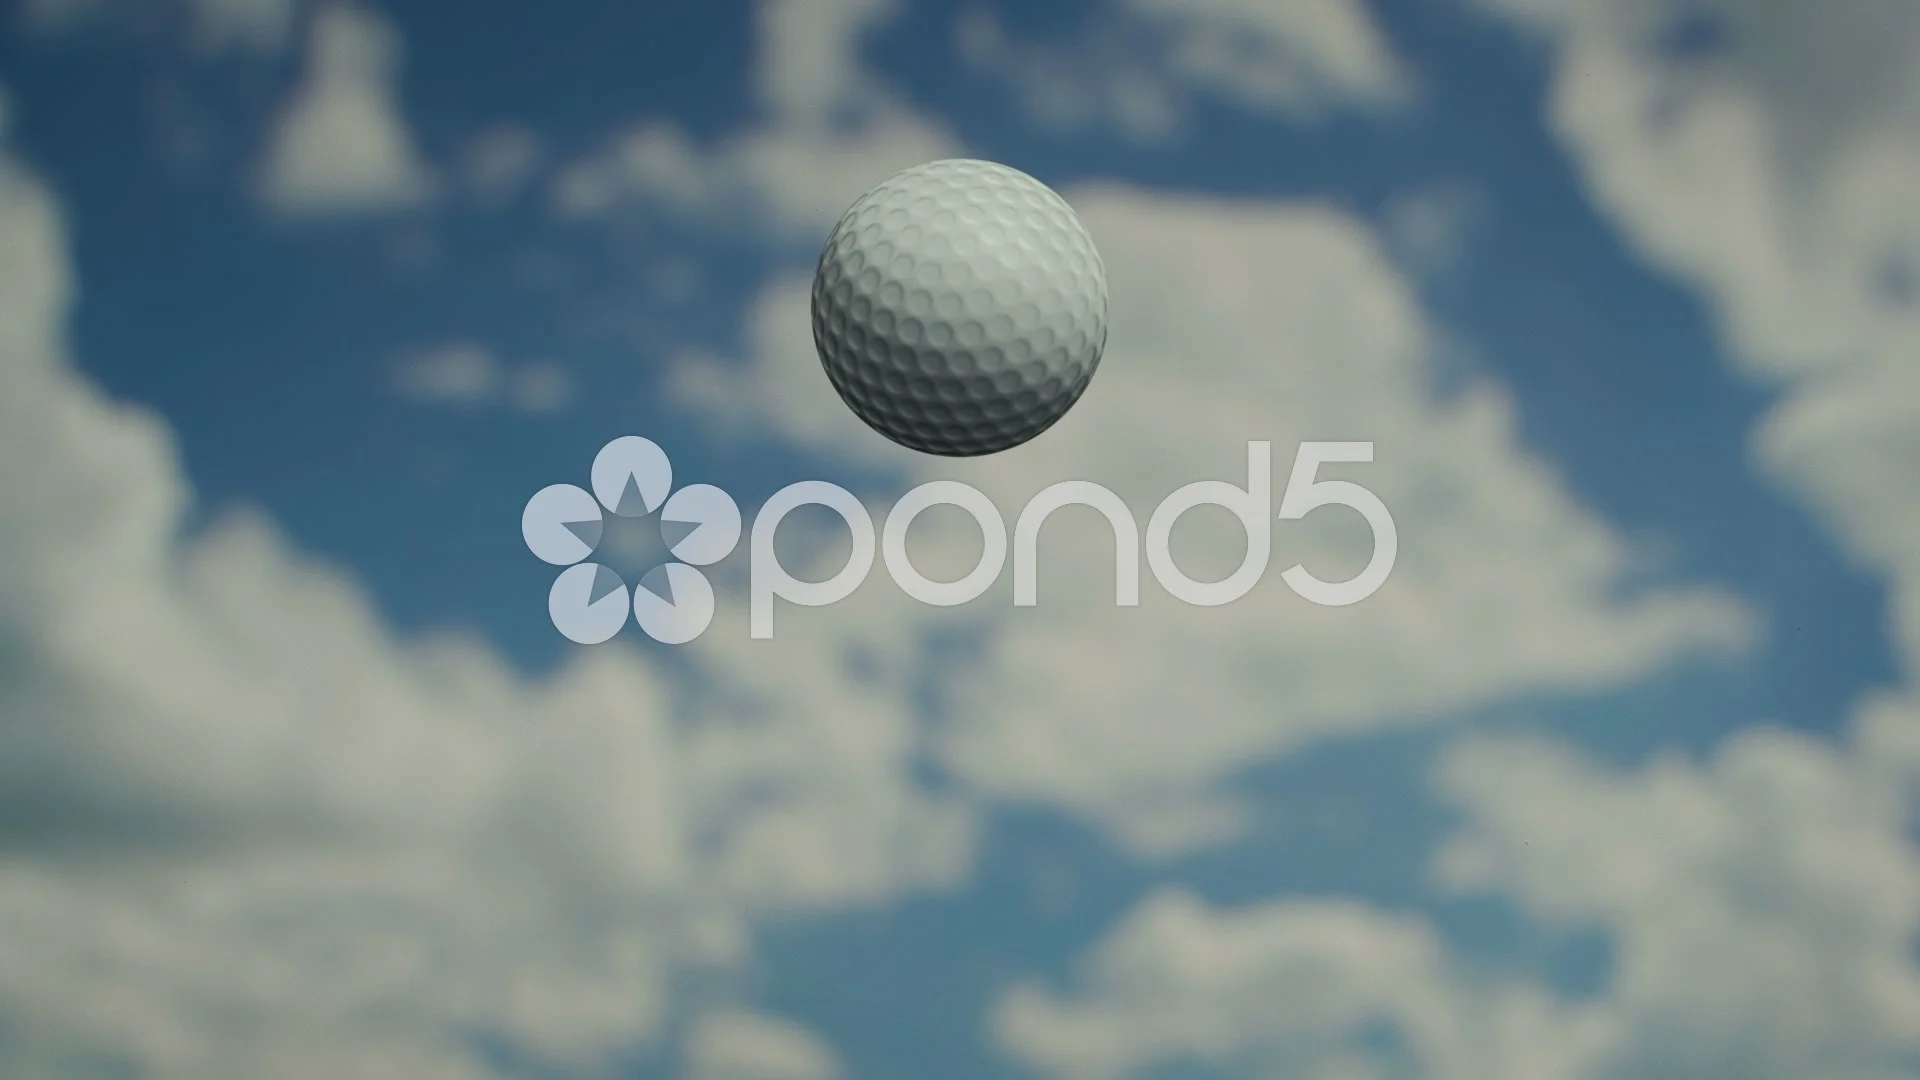 Golf ball in the air, slow motion, Stock Video